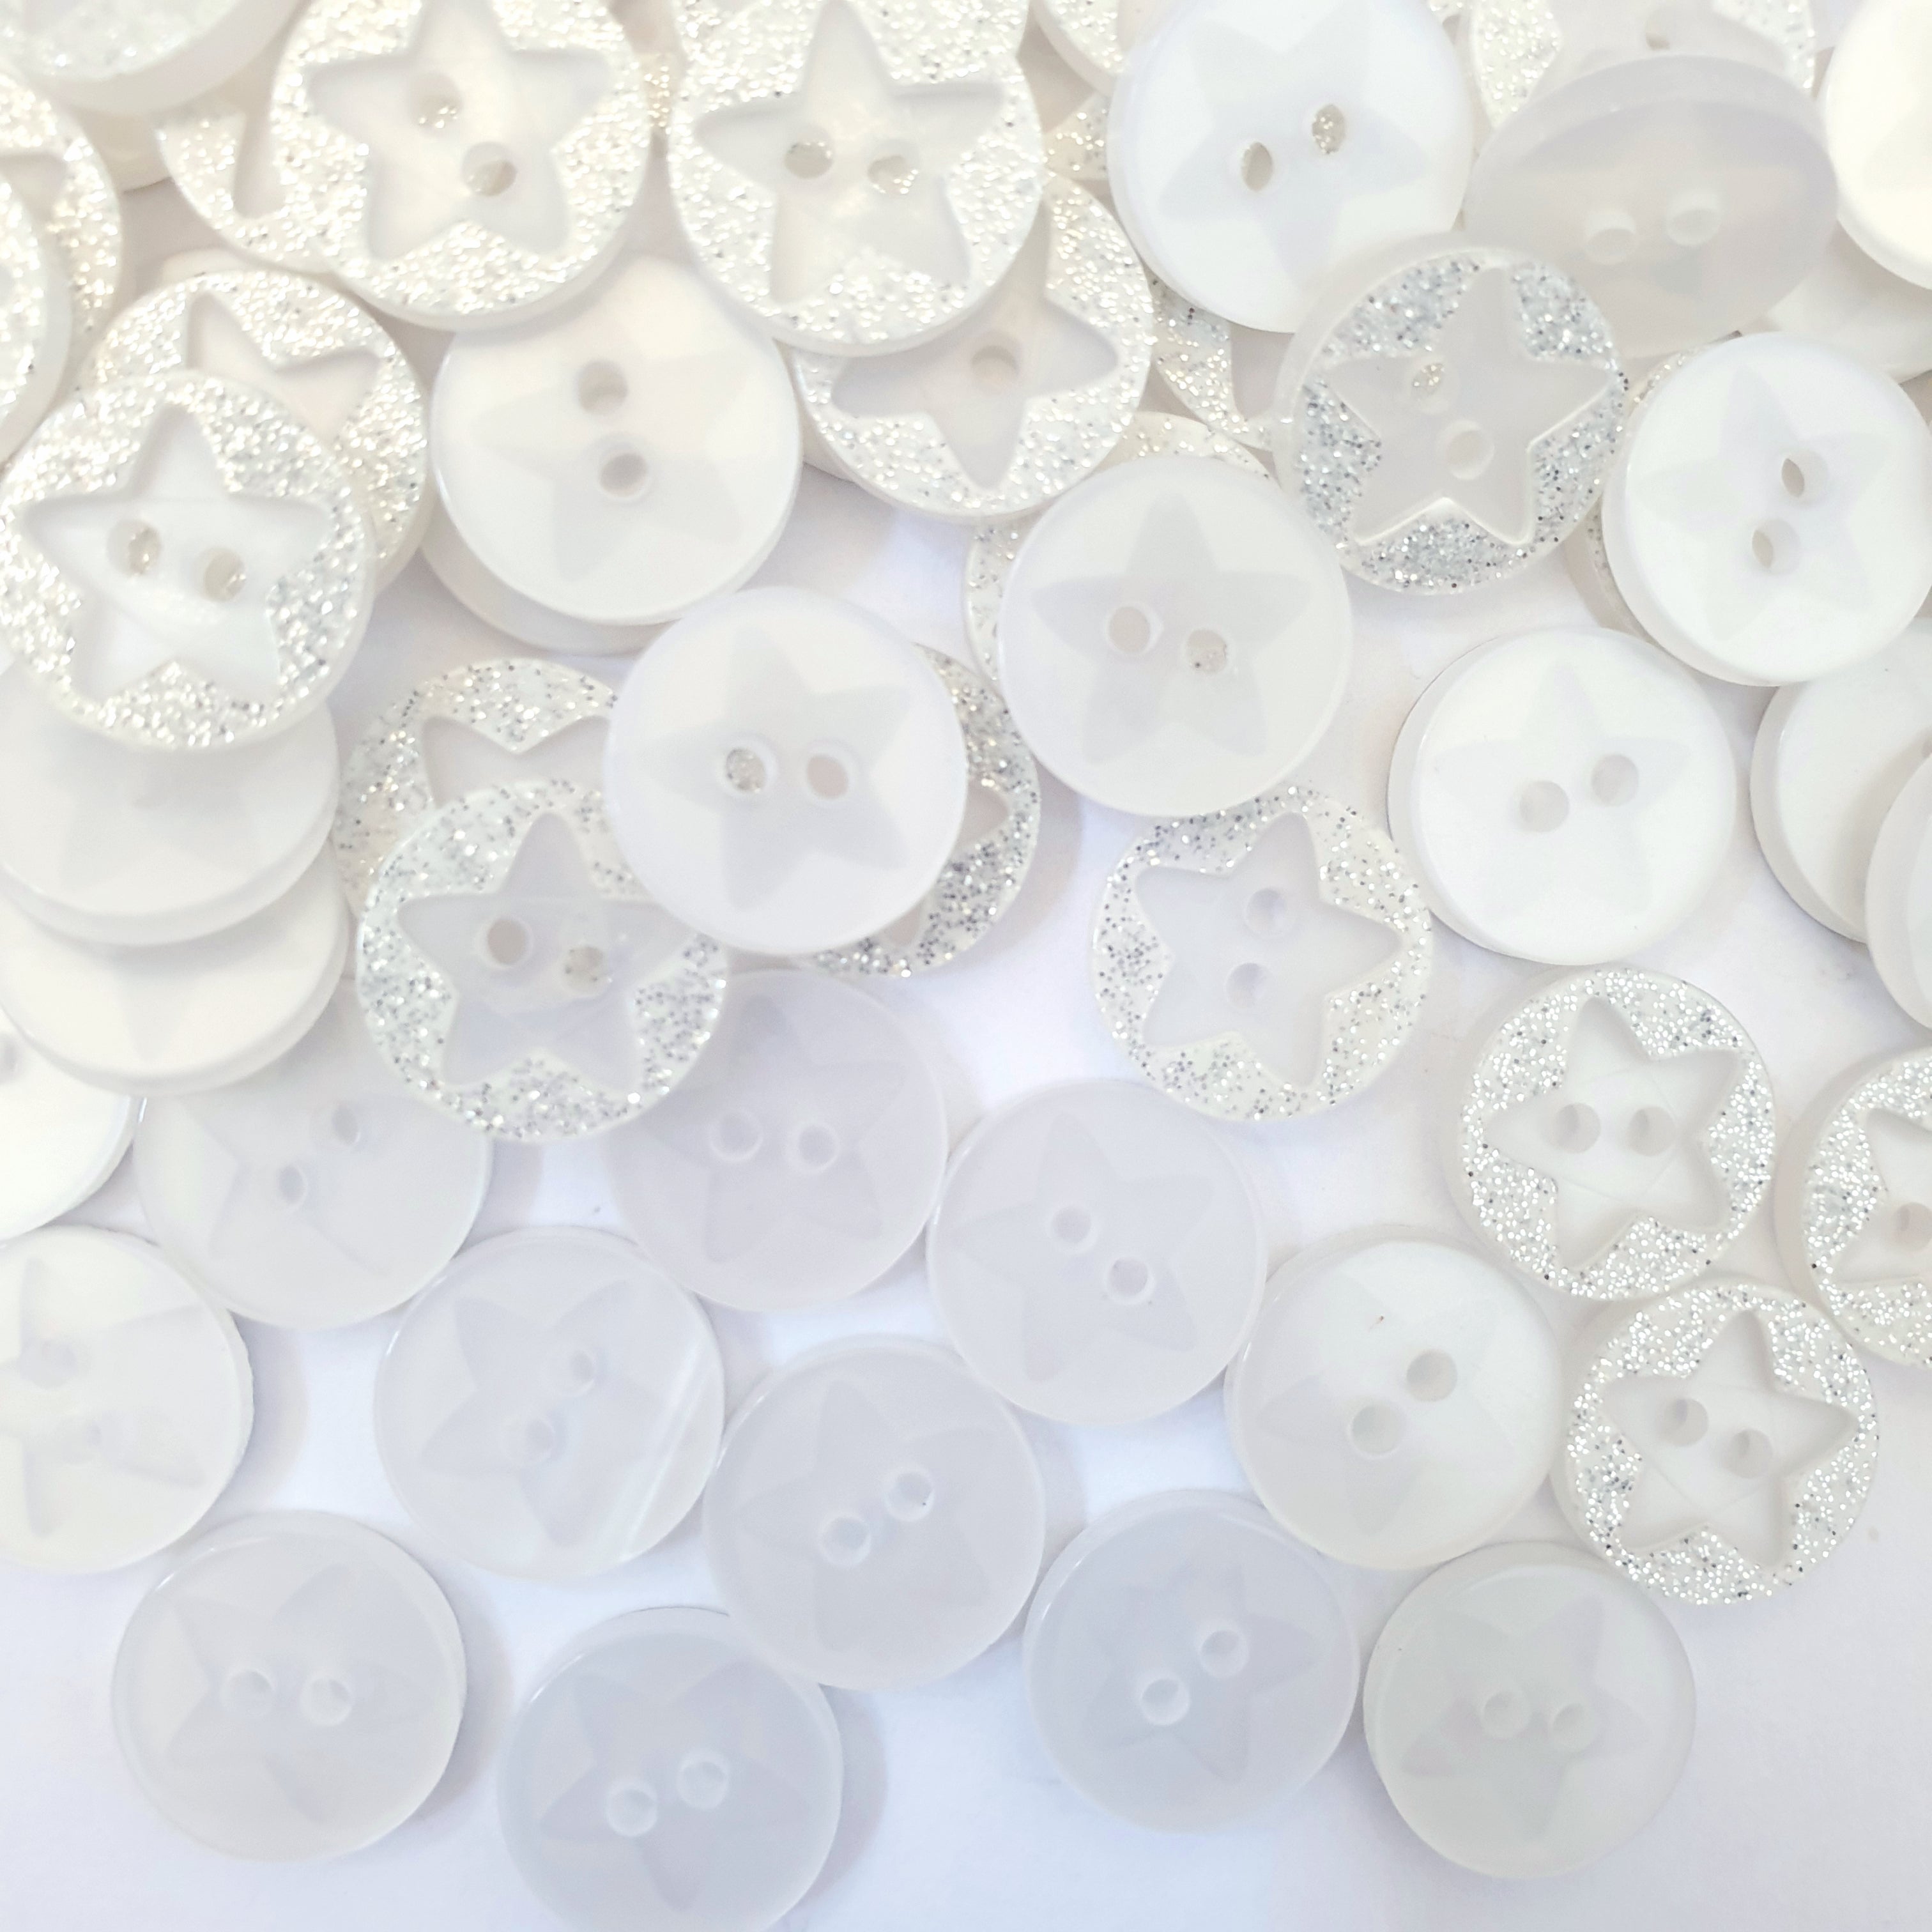 MajorCrafts 40pcs 14mm White Glittered 'Star Engraved' 2 Holes Round Sewing Resin Buttons